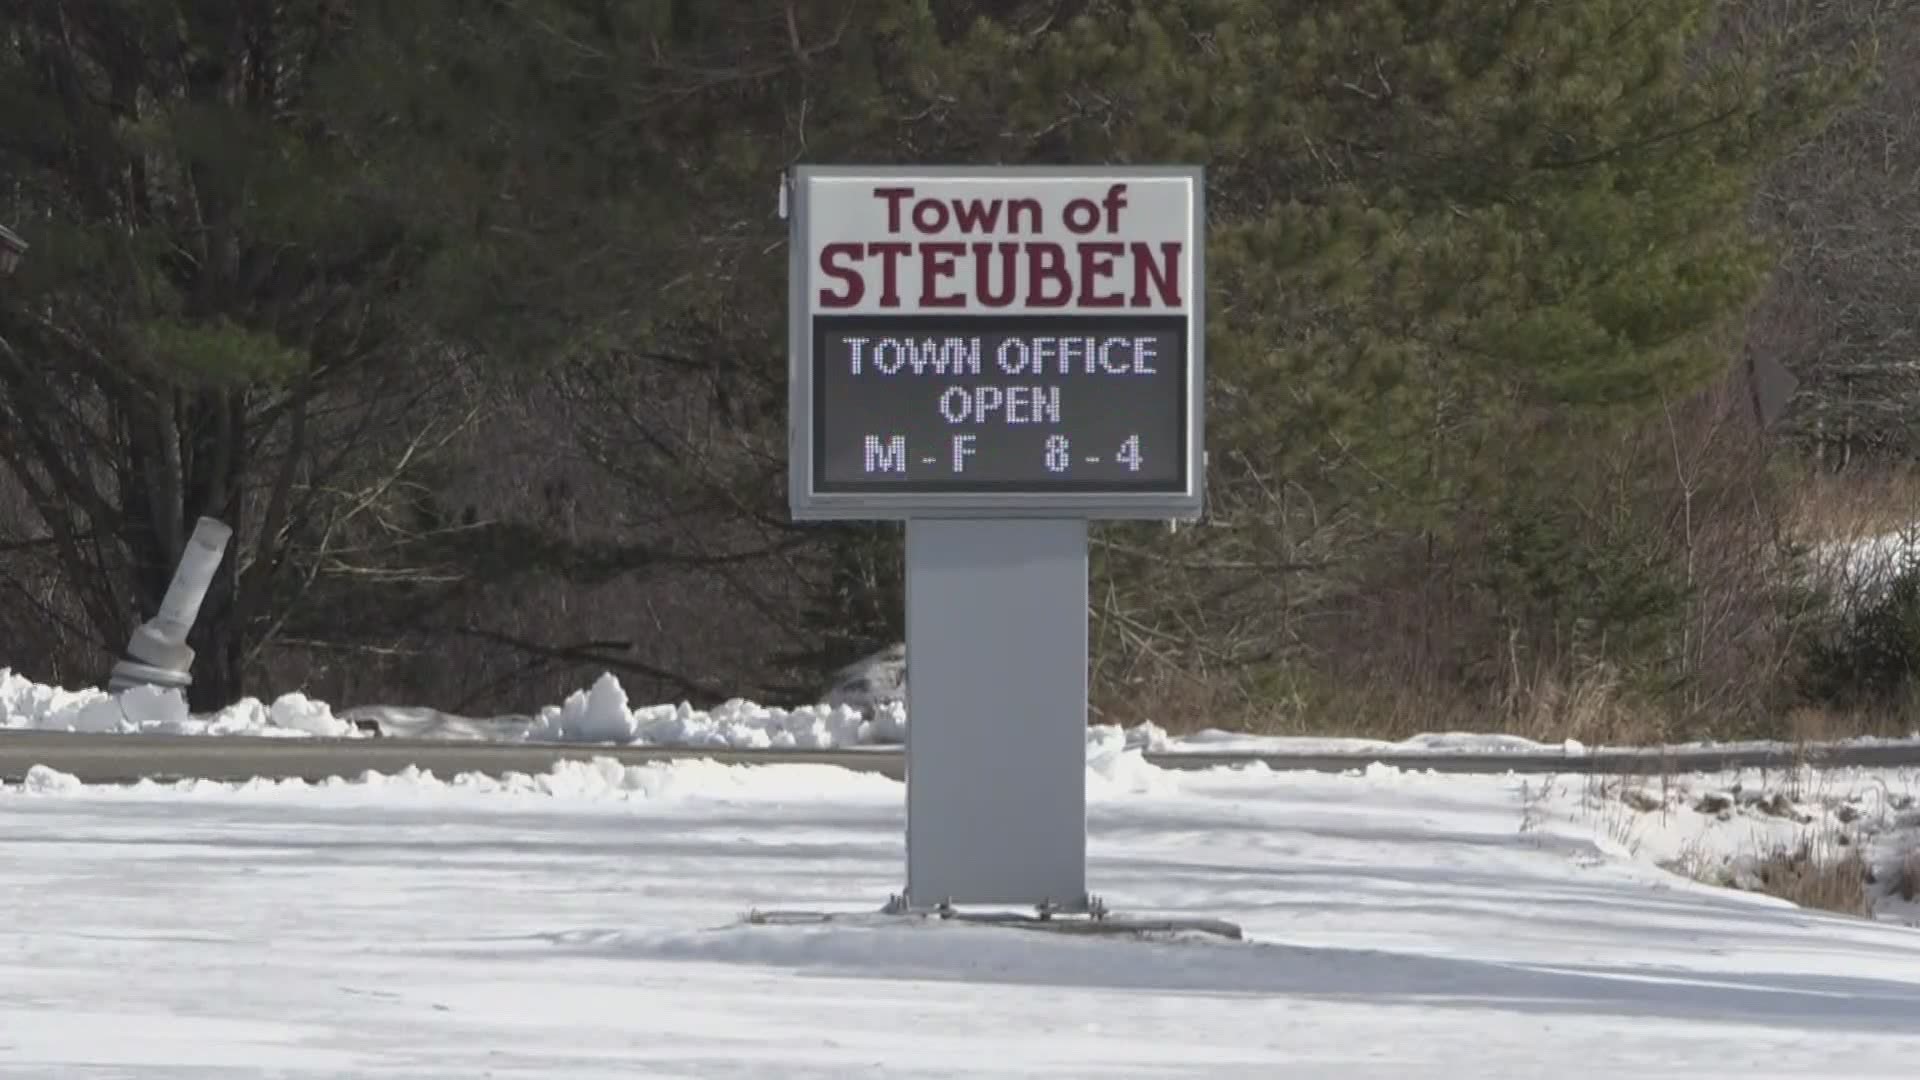 The Board of Selectmen in Steuben passed a resolution to quash the mandate, saying that they feel it is unfair to those with disabilities who can't wear a mask.